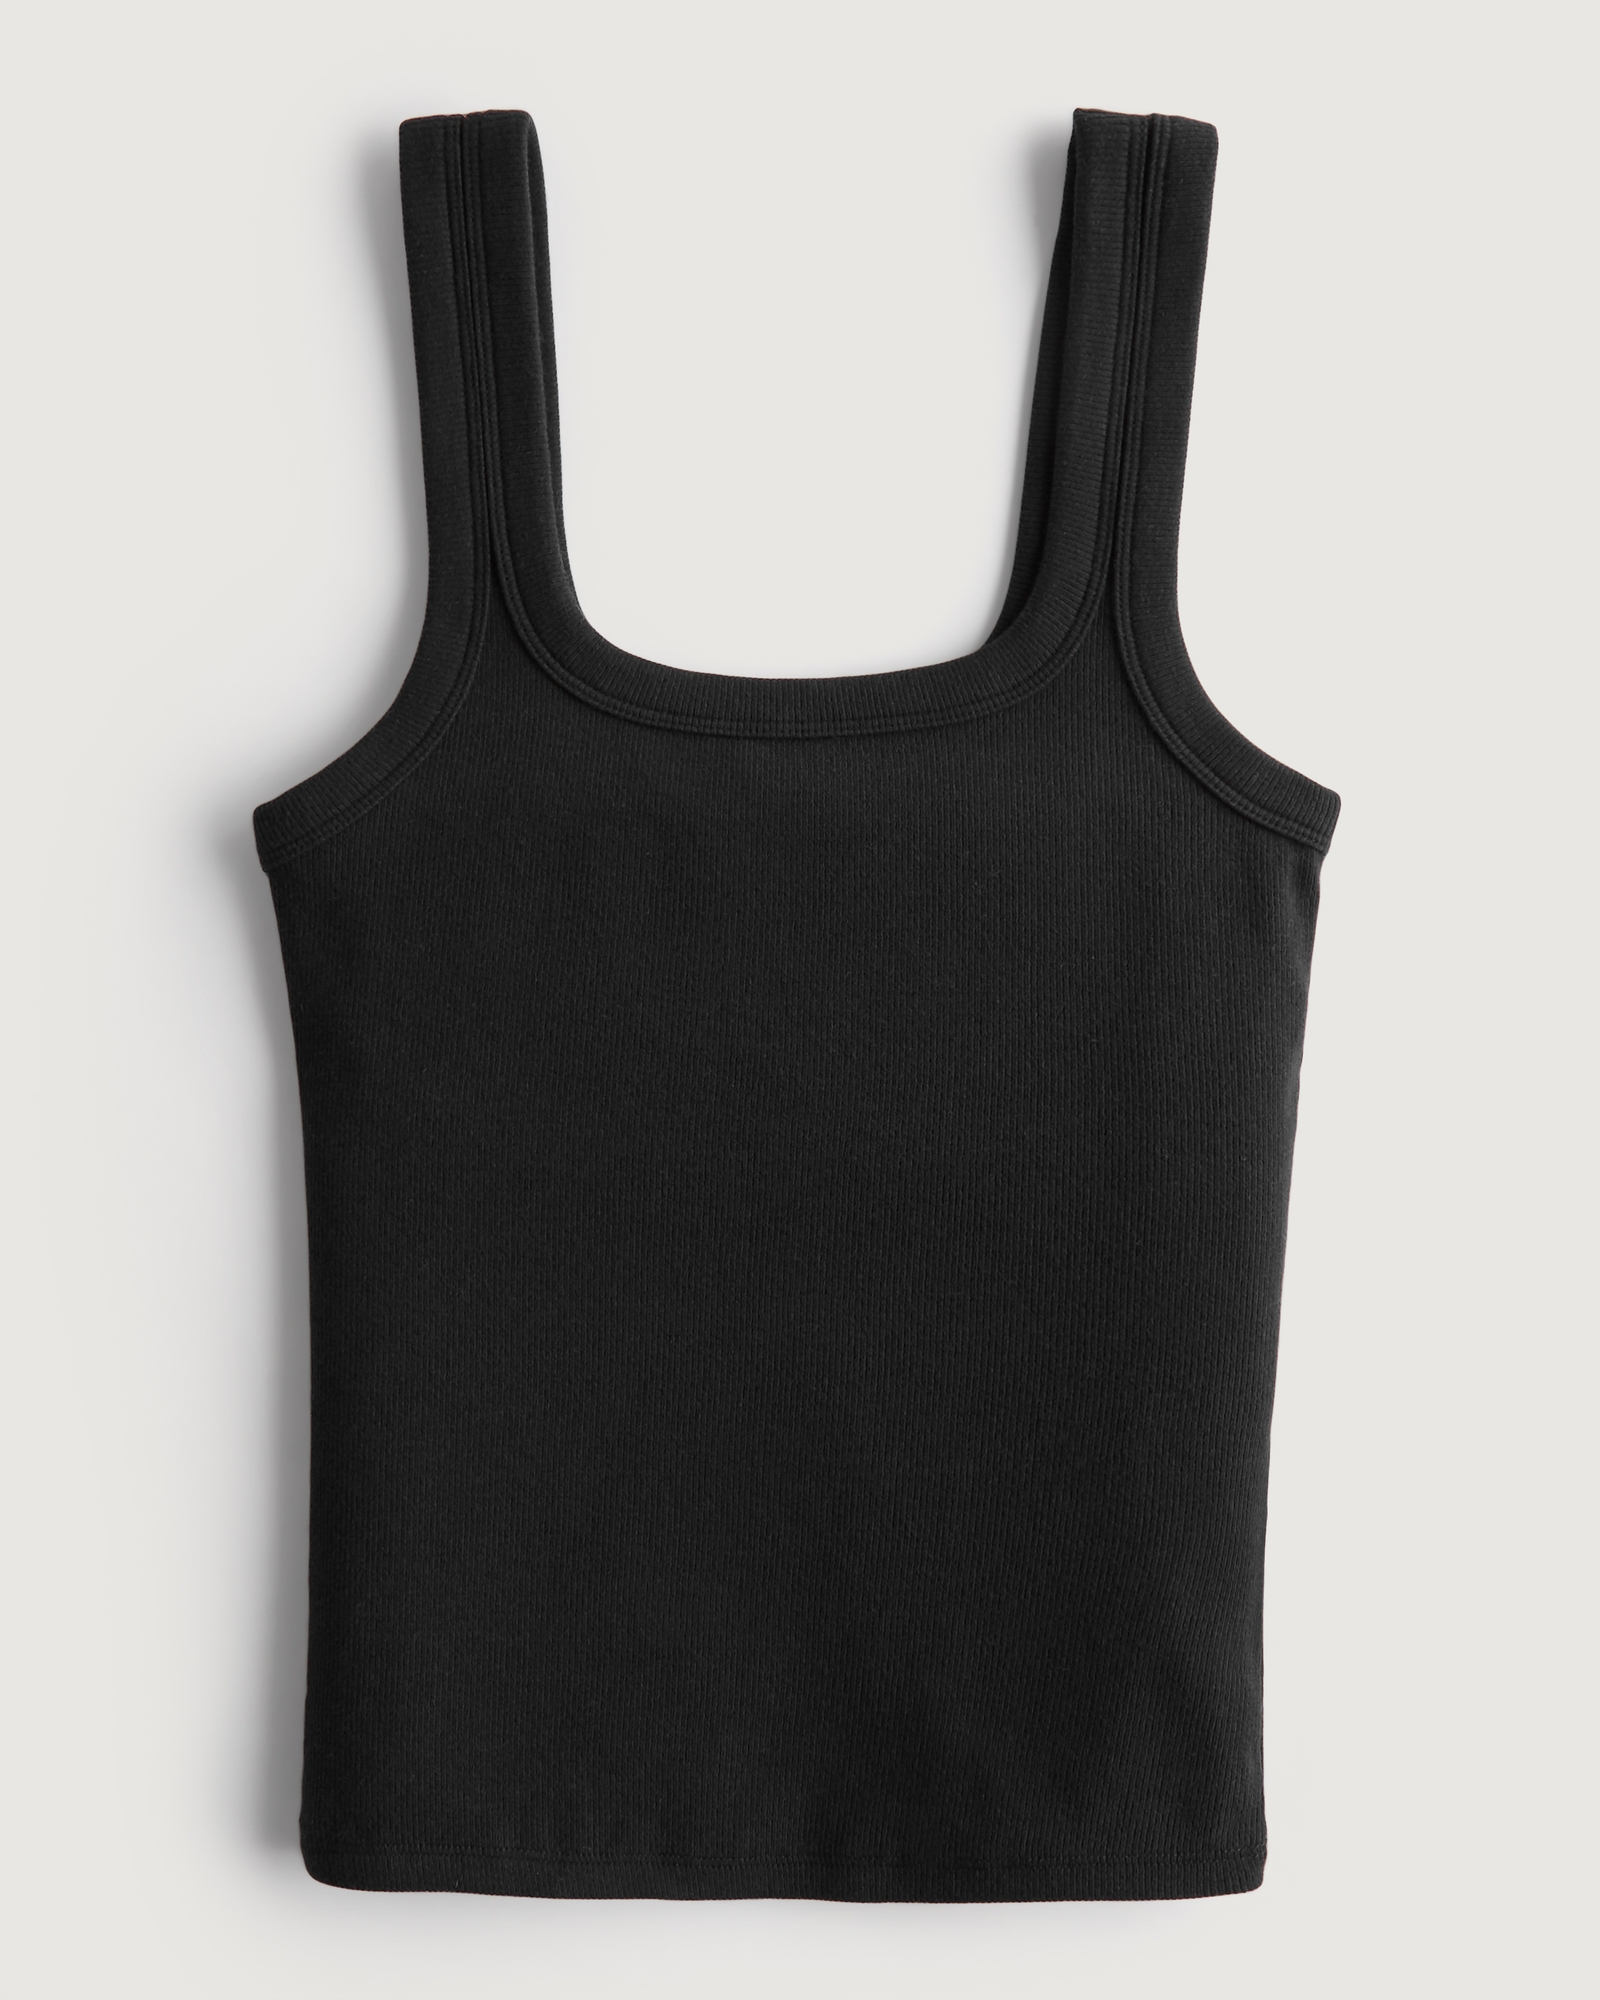 Supersoft Contrast Thin Strap Tank Top in Black/white Tip